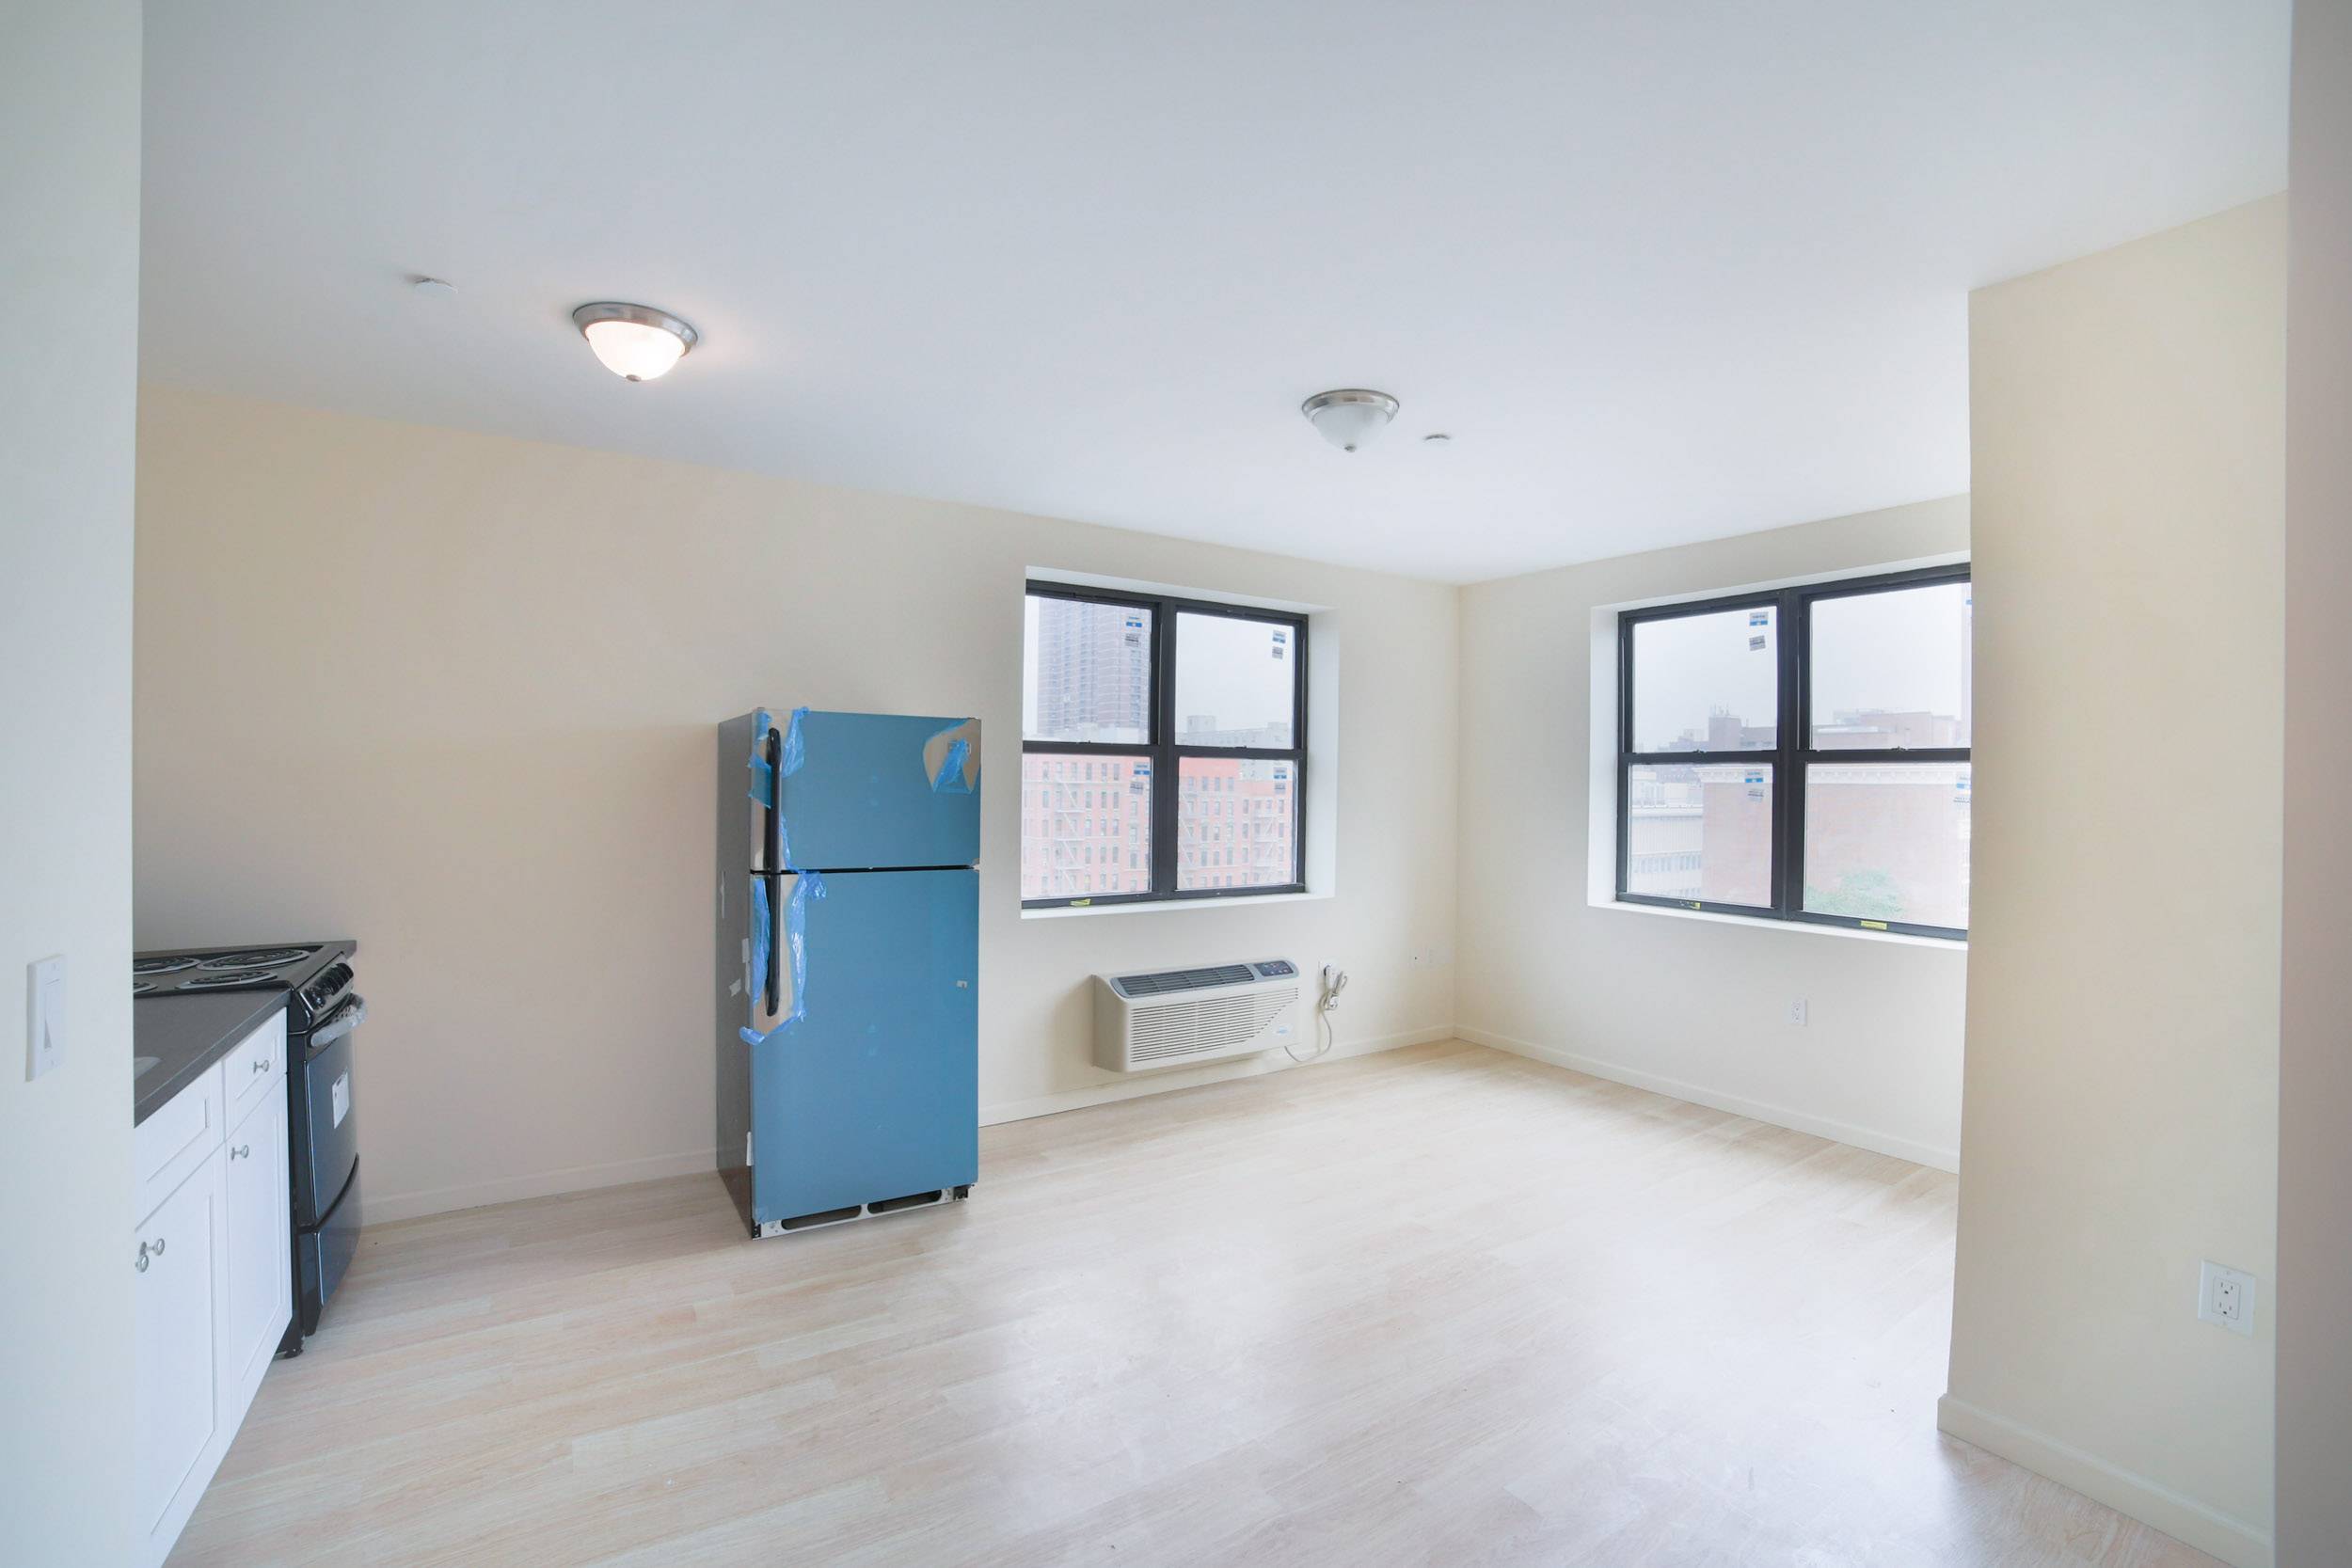 1674 Park Ave: NO FEE! New Construction Corner 2 Bedroom Apartment For Rent